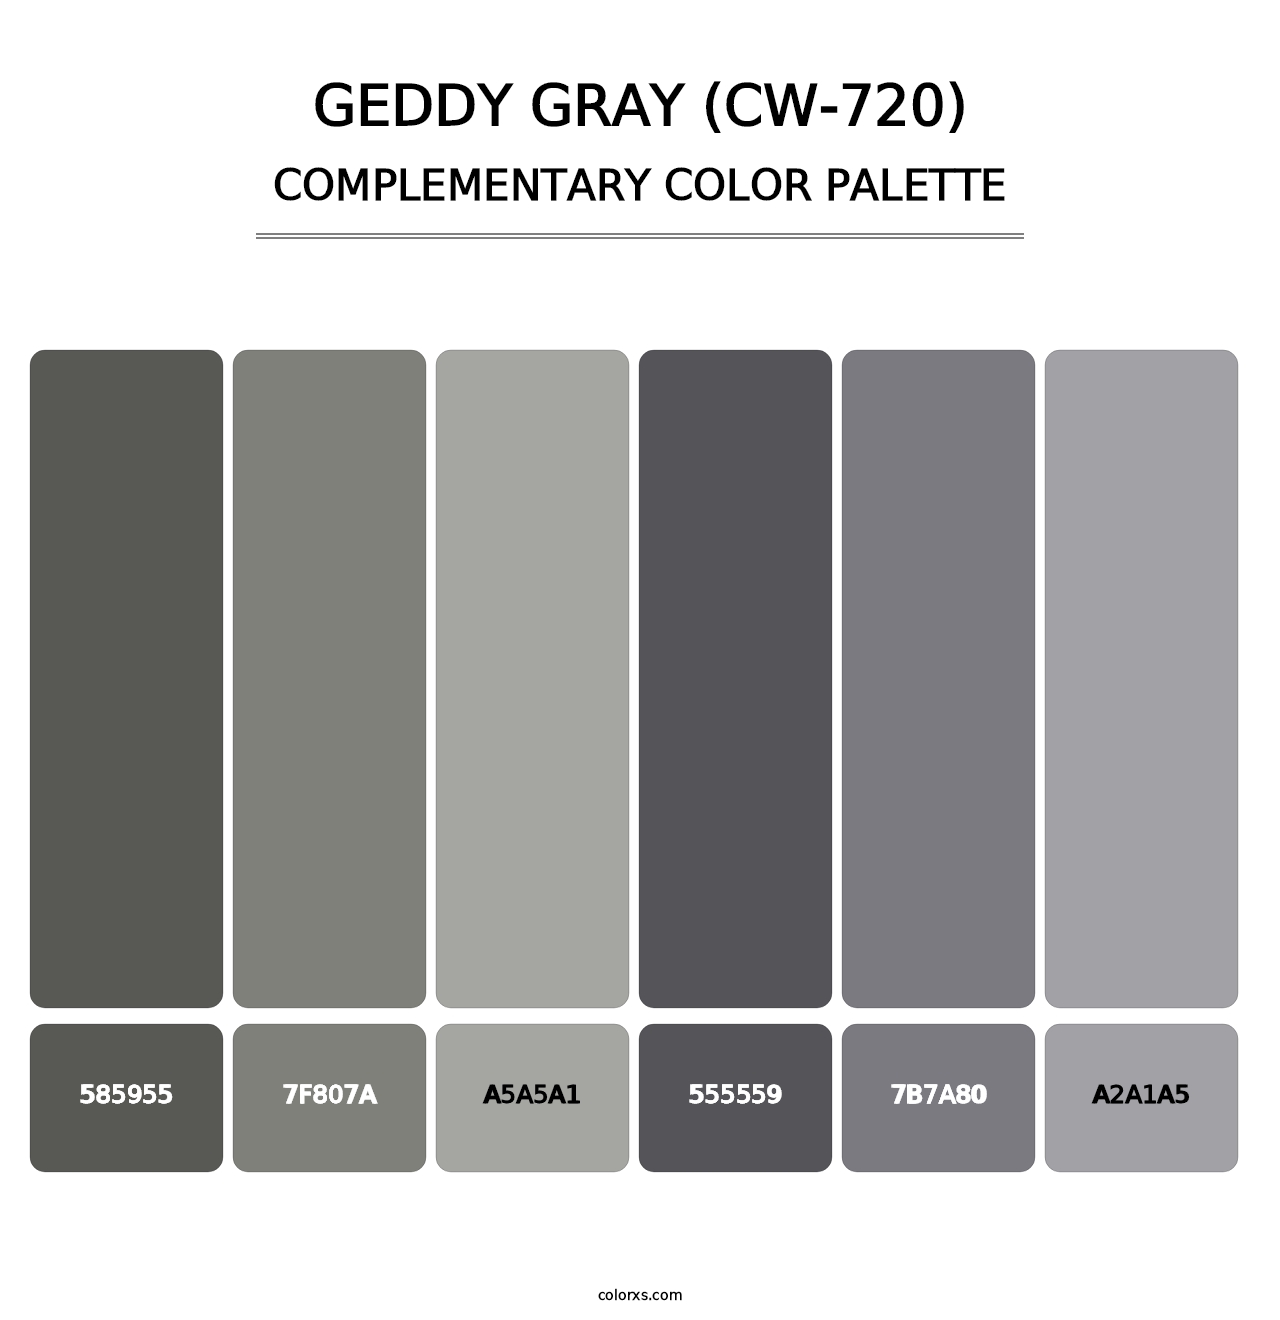 Geddy Gray (CW-720) - Complementary Color Palette